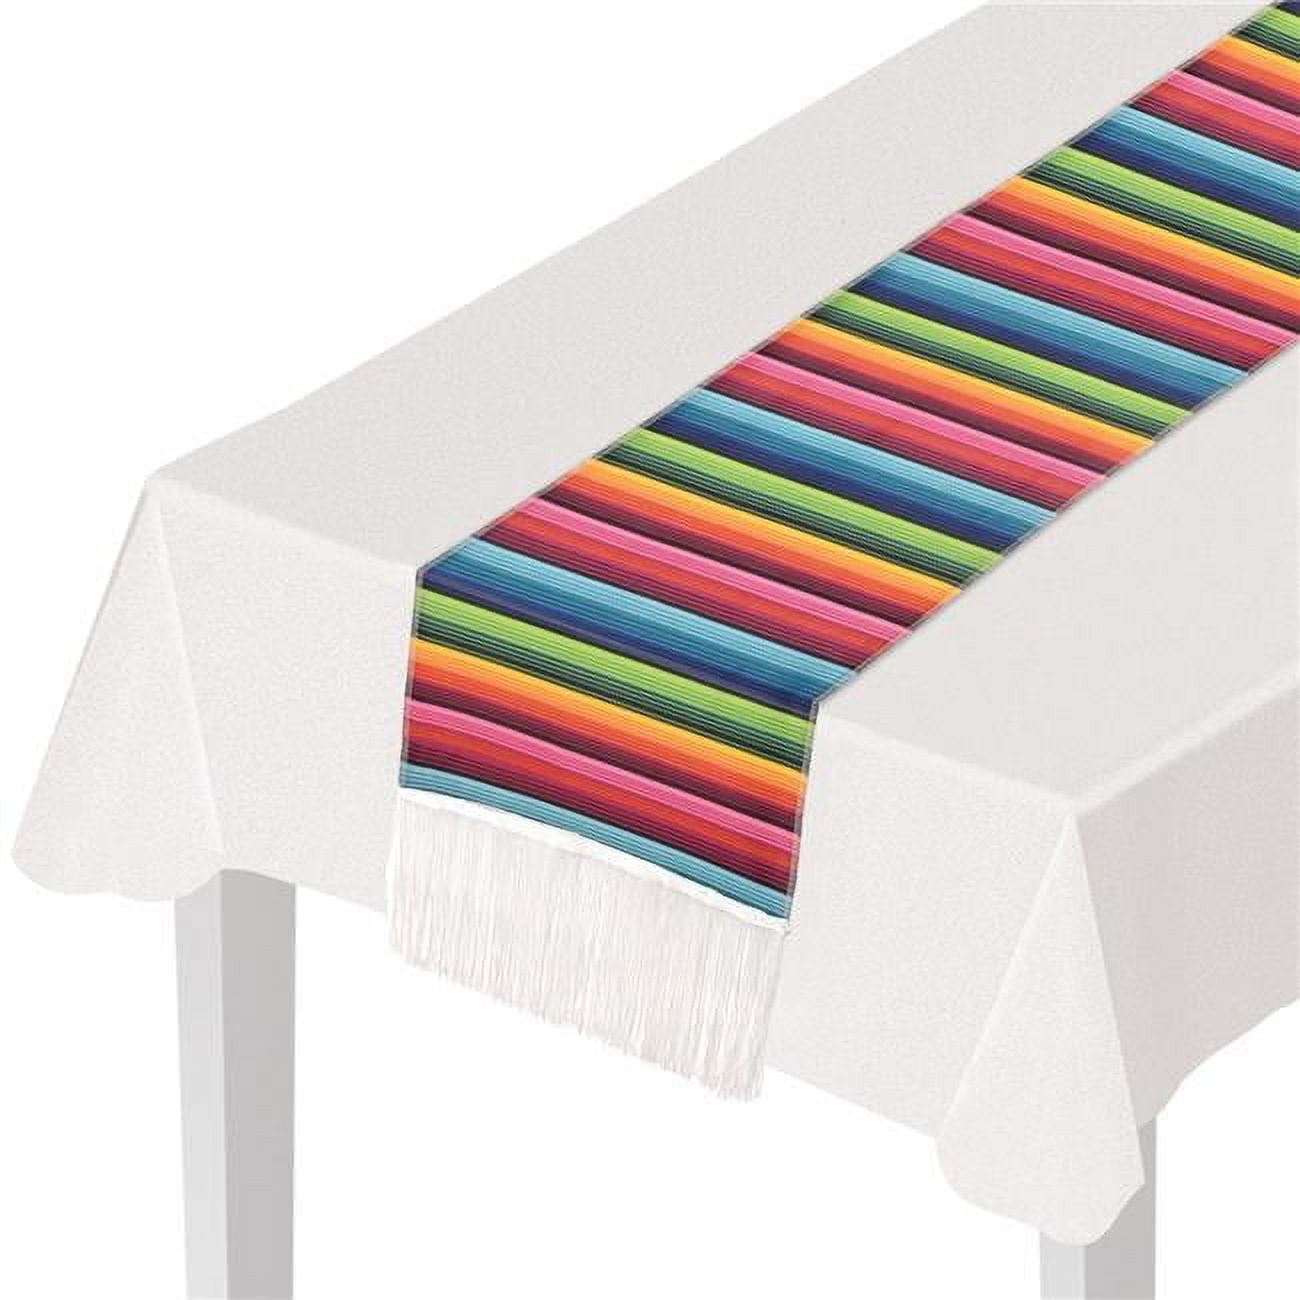 Picture of Beistle 53996 11.5 in. x 6 ft. Fiesta Fabric Table Runner, Multi Color - Pack of 12